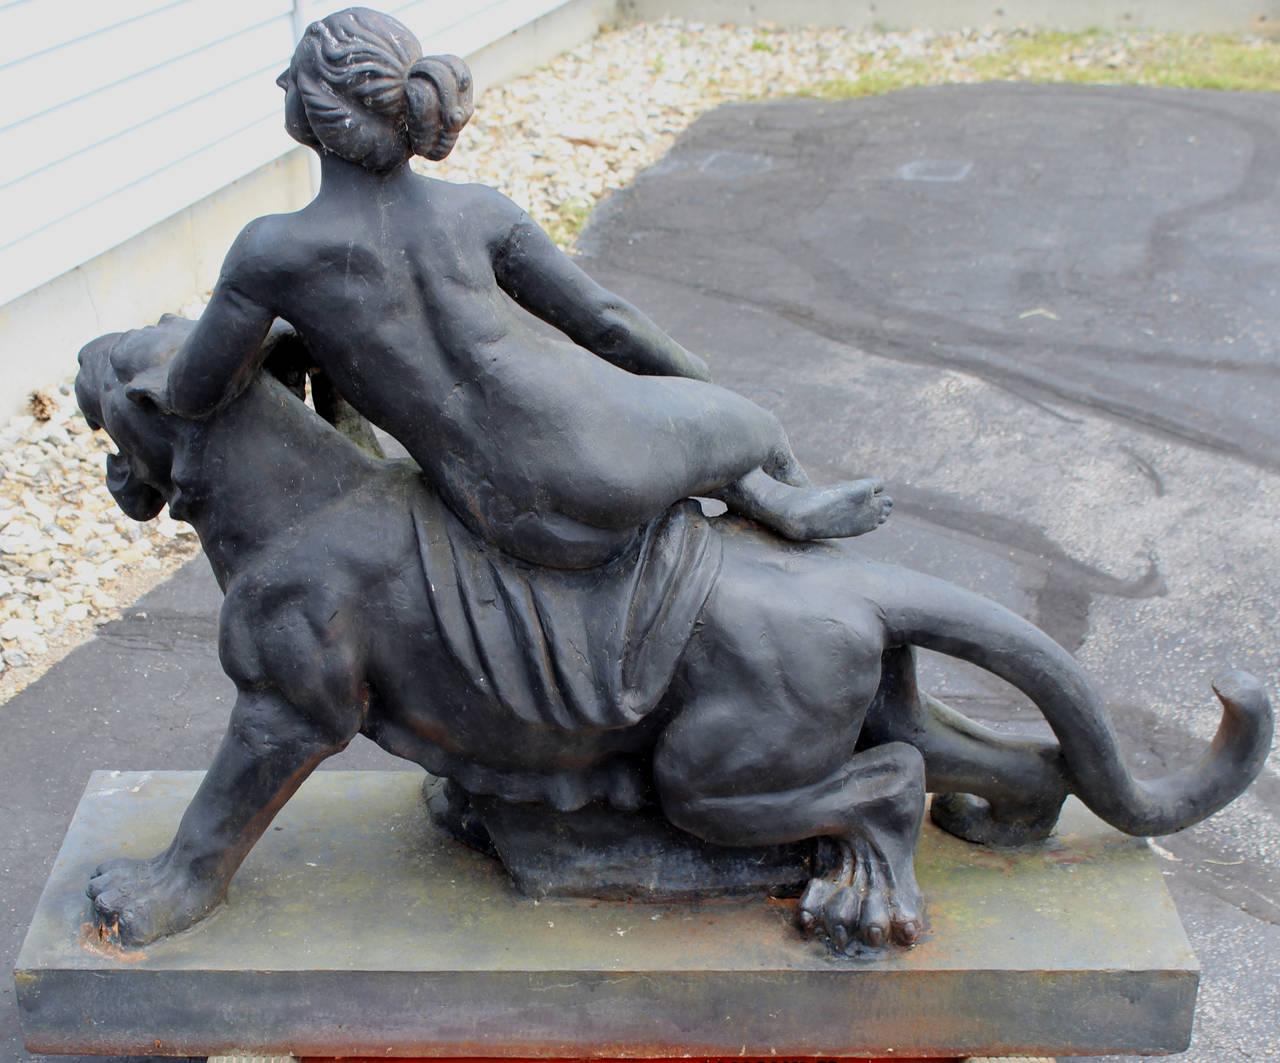 A spectacular 19th century cast iron sculpture of a classical nude woman on a lioness with drapery all supported by a rectangular plinth. Painted in black with a nice patina. A great outdoor garden element or centerpiece for your landscape decor.